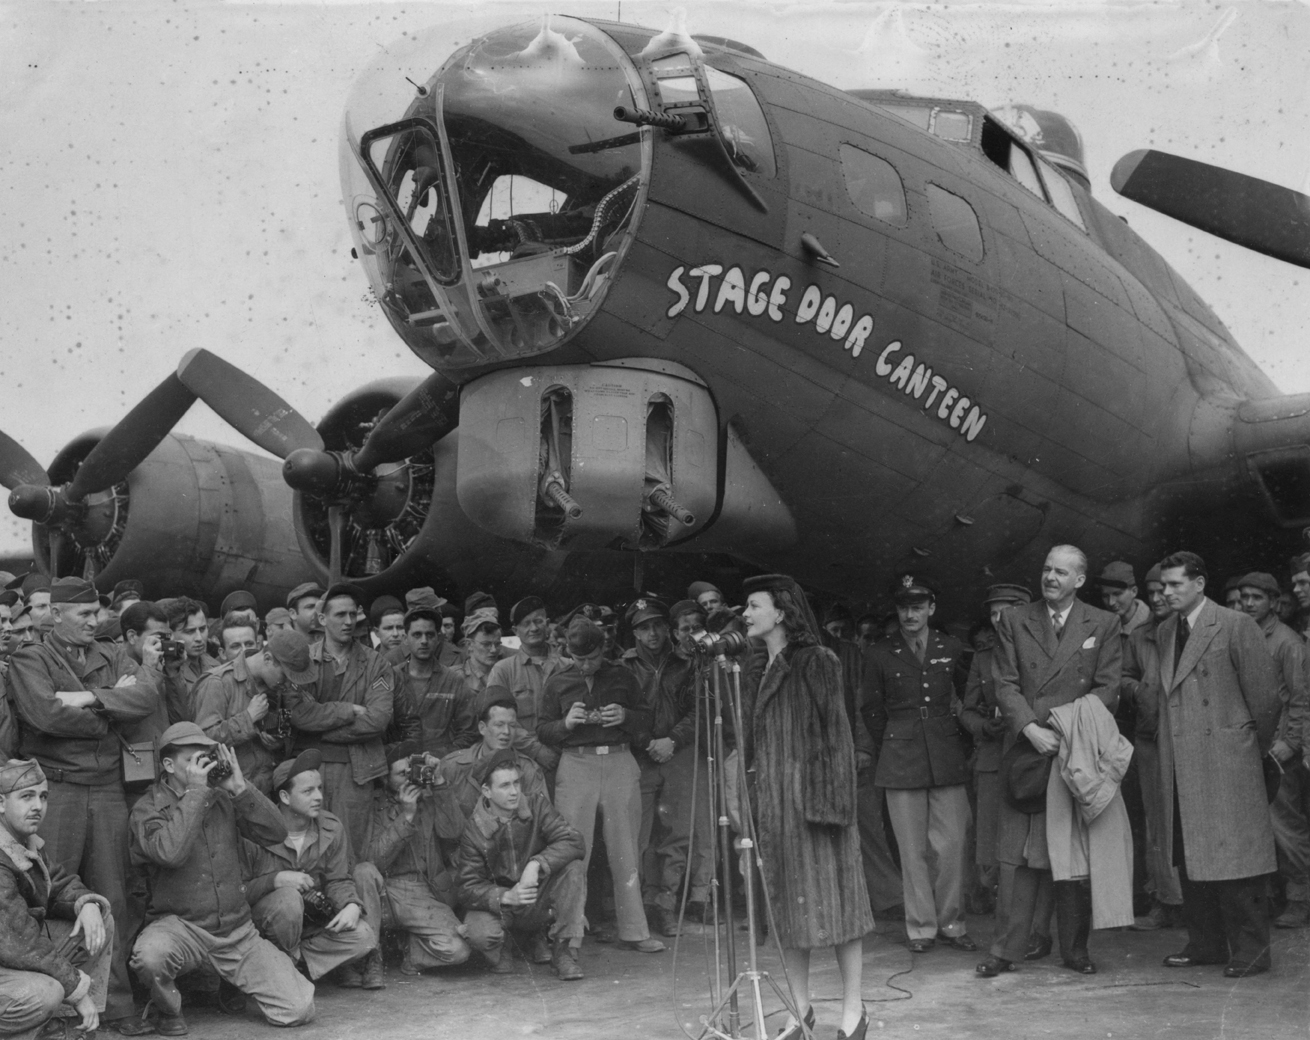 Actress Vivian Leigh speaks to the 381st Bomb Group at Ridgewell, Hallstead, UK during the christening ceremonies for B-17G “Stage Door Canteen,” 21 Apr 1944. Also present were actors Alfred Lunt and Laurence Olivier.